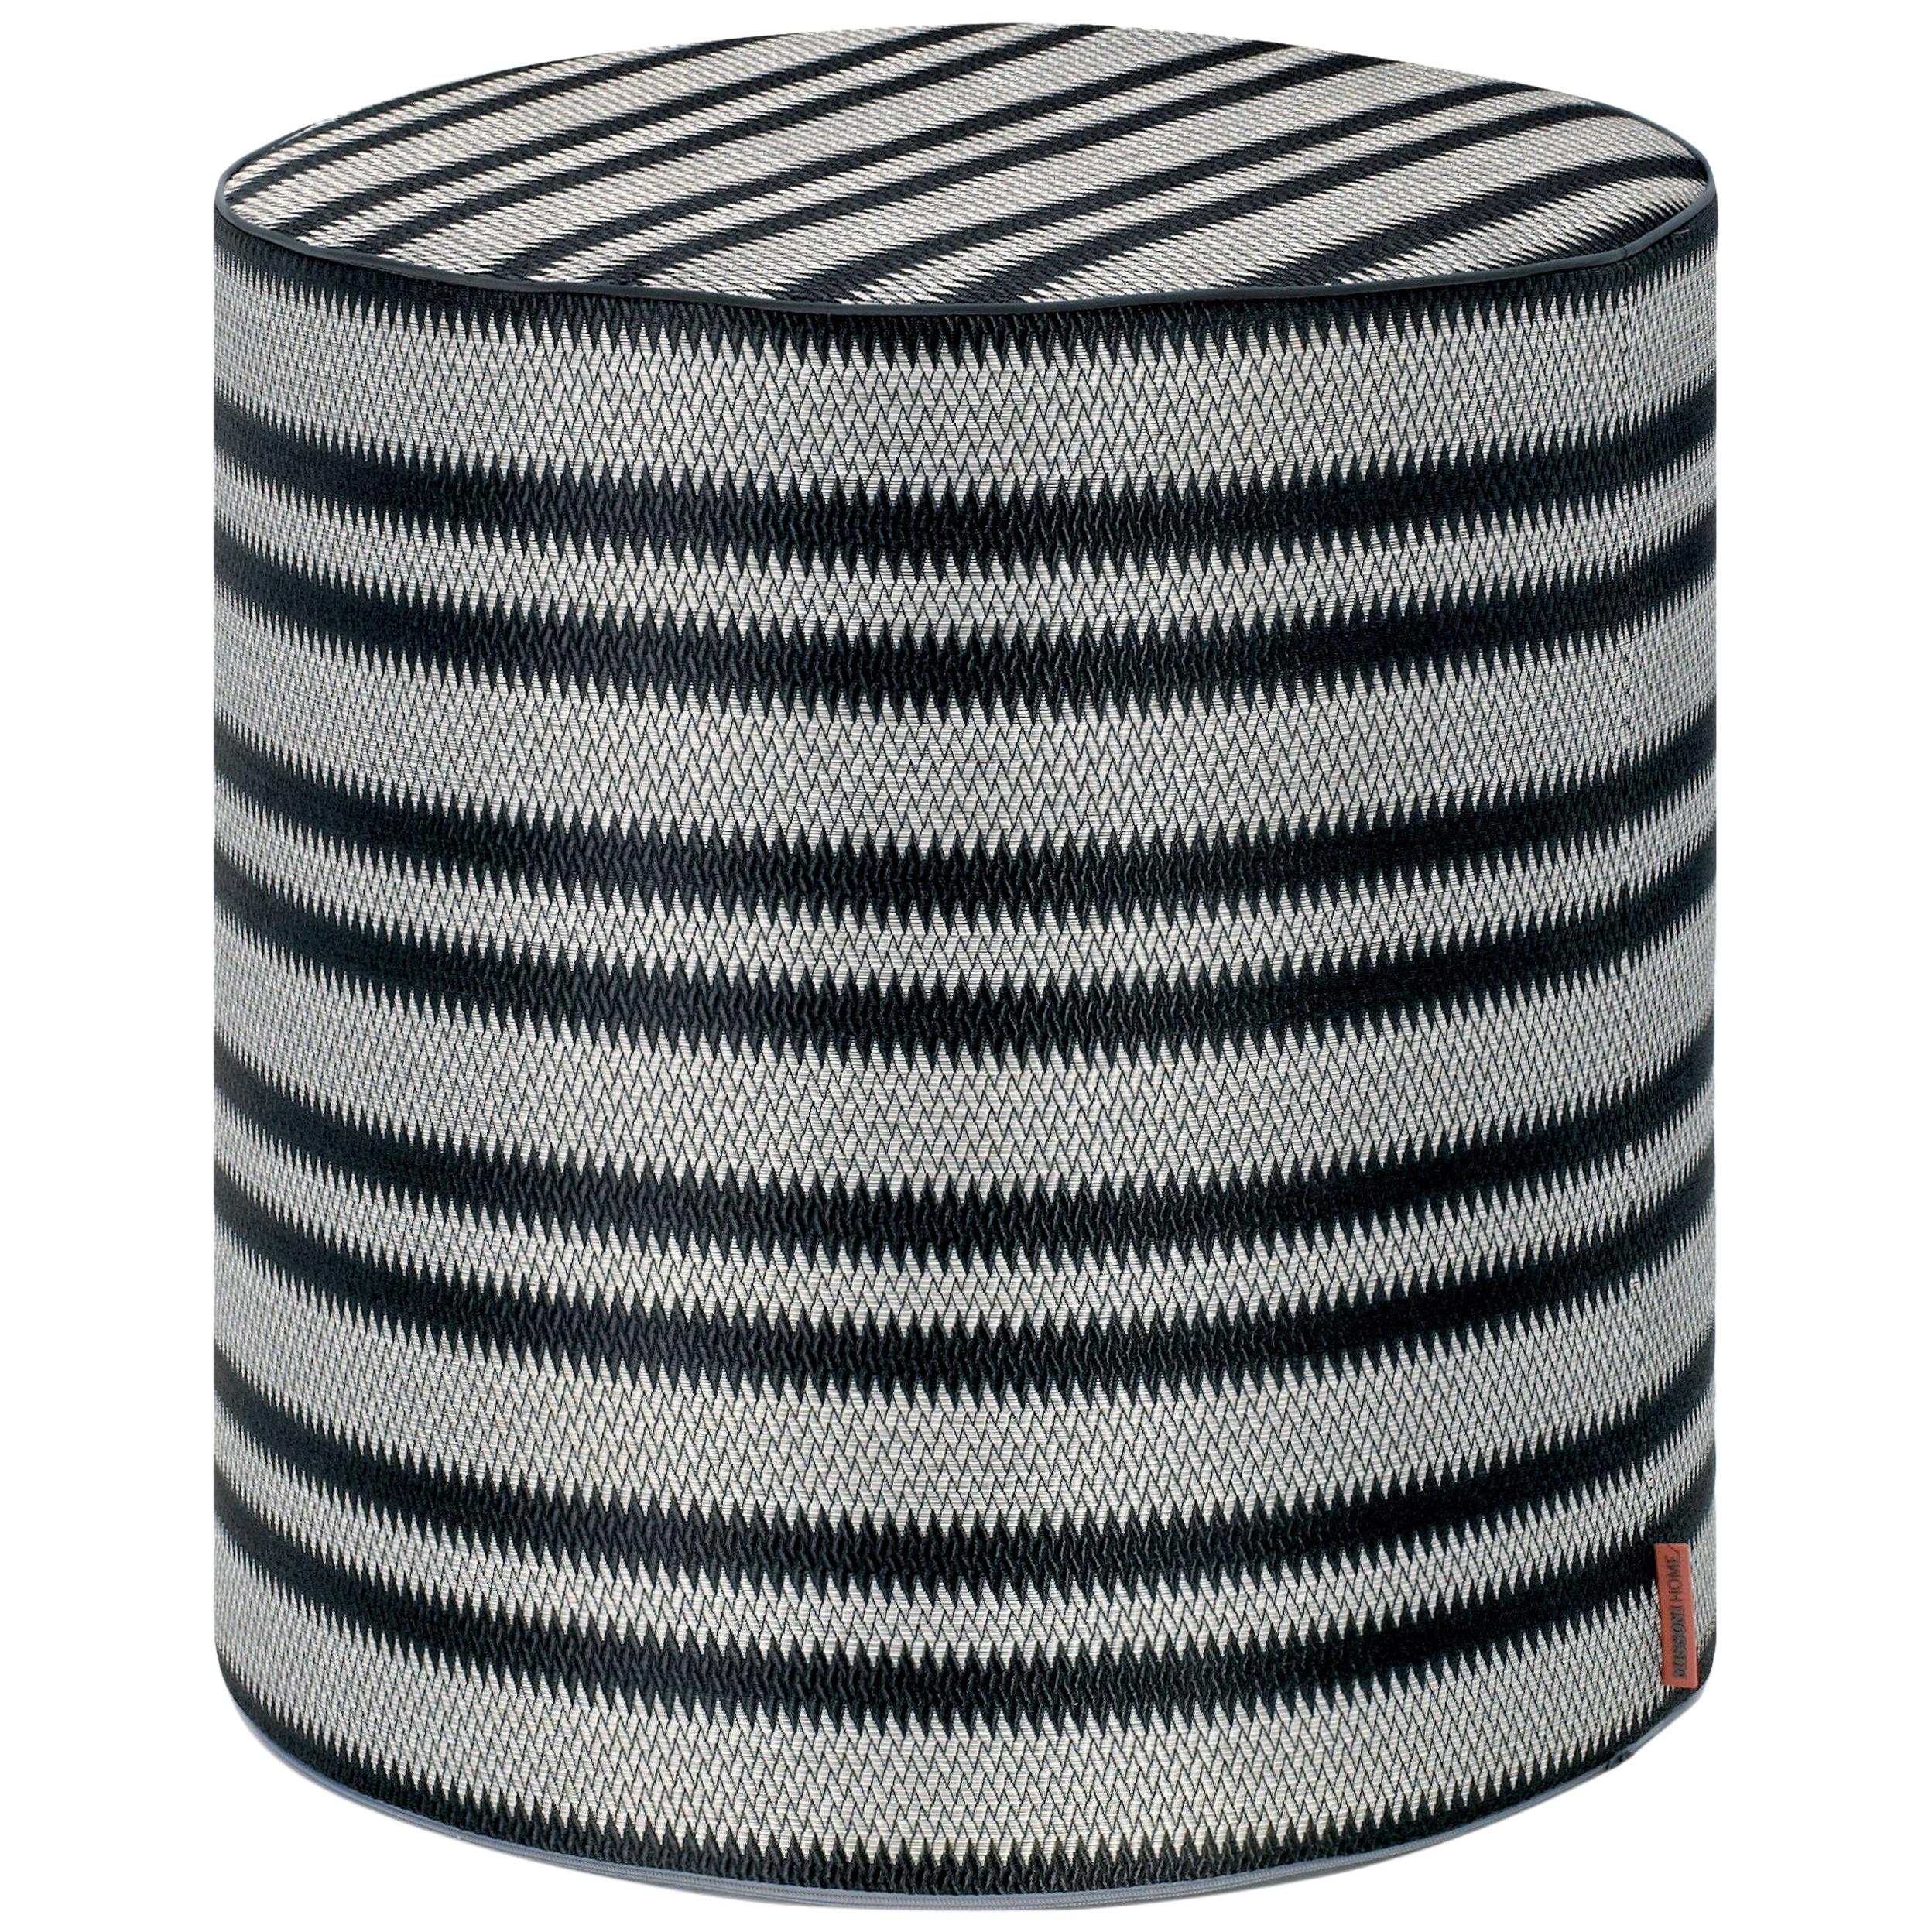 Missoni Home Prescott Tall Cylinder Pouf in Black and White with Stripe Print For Sale